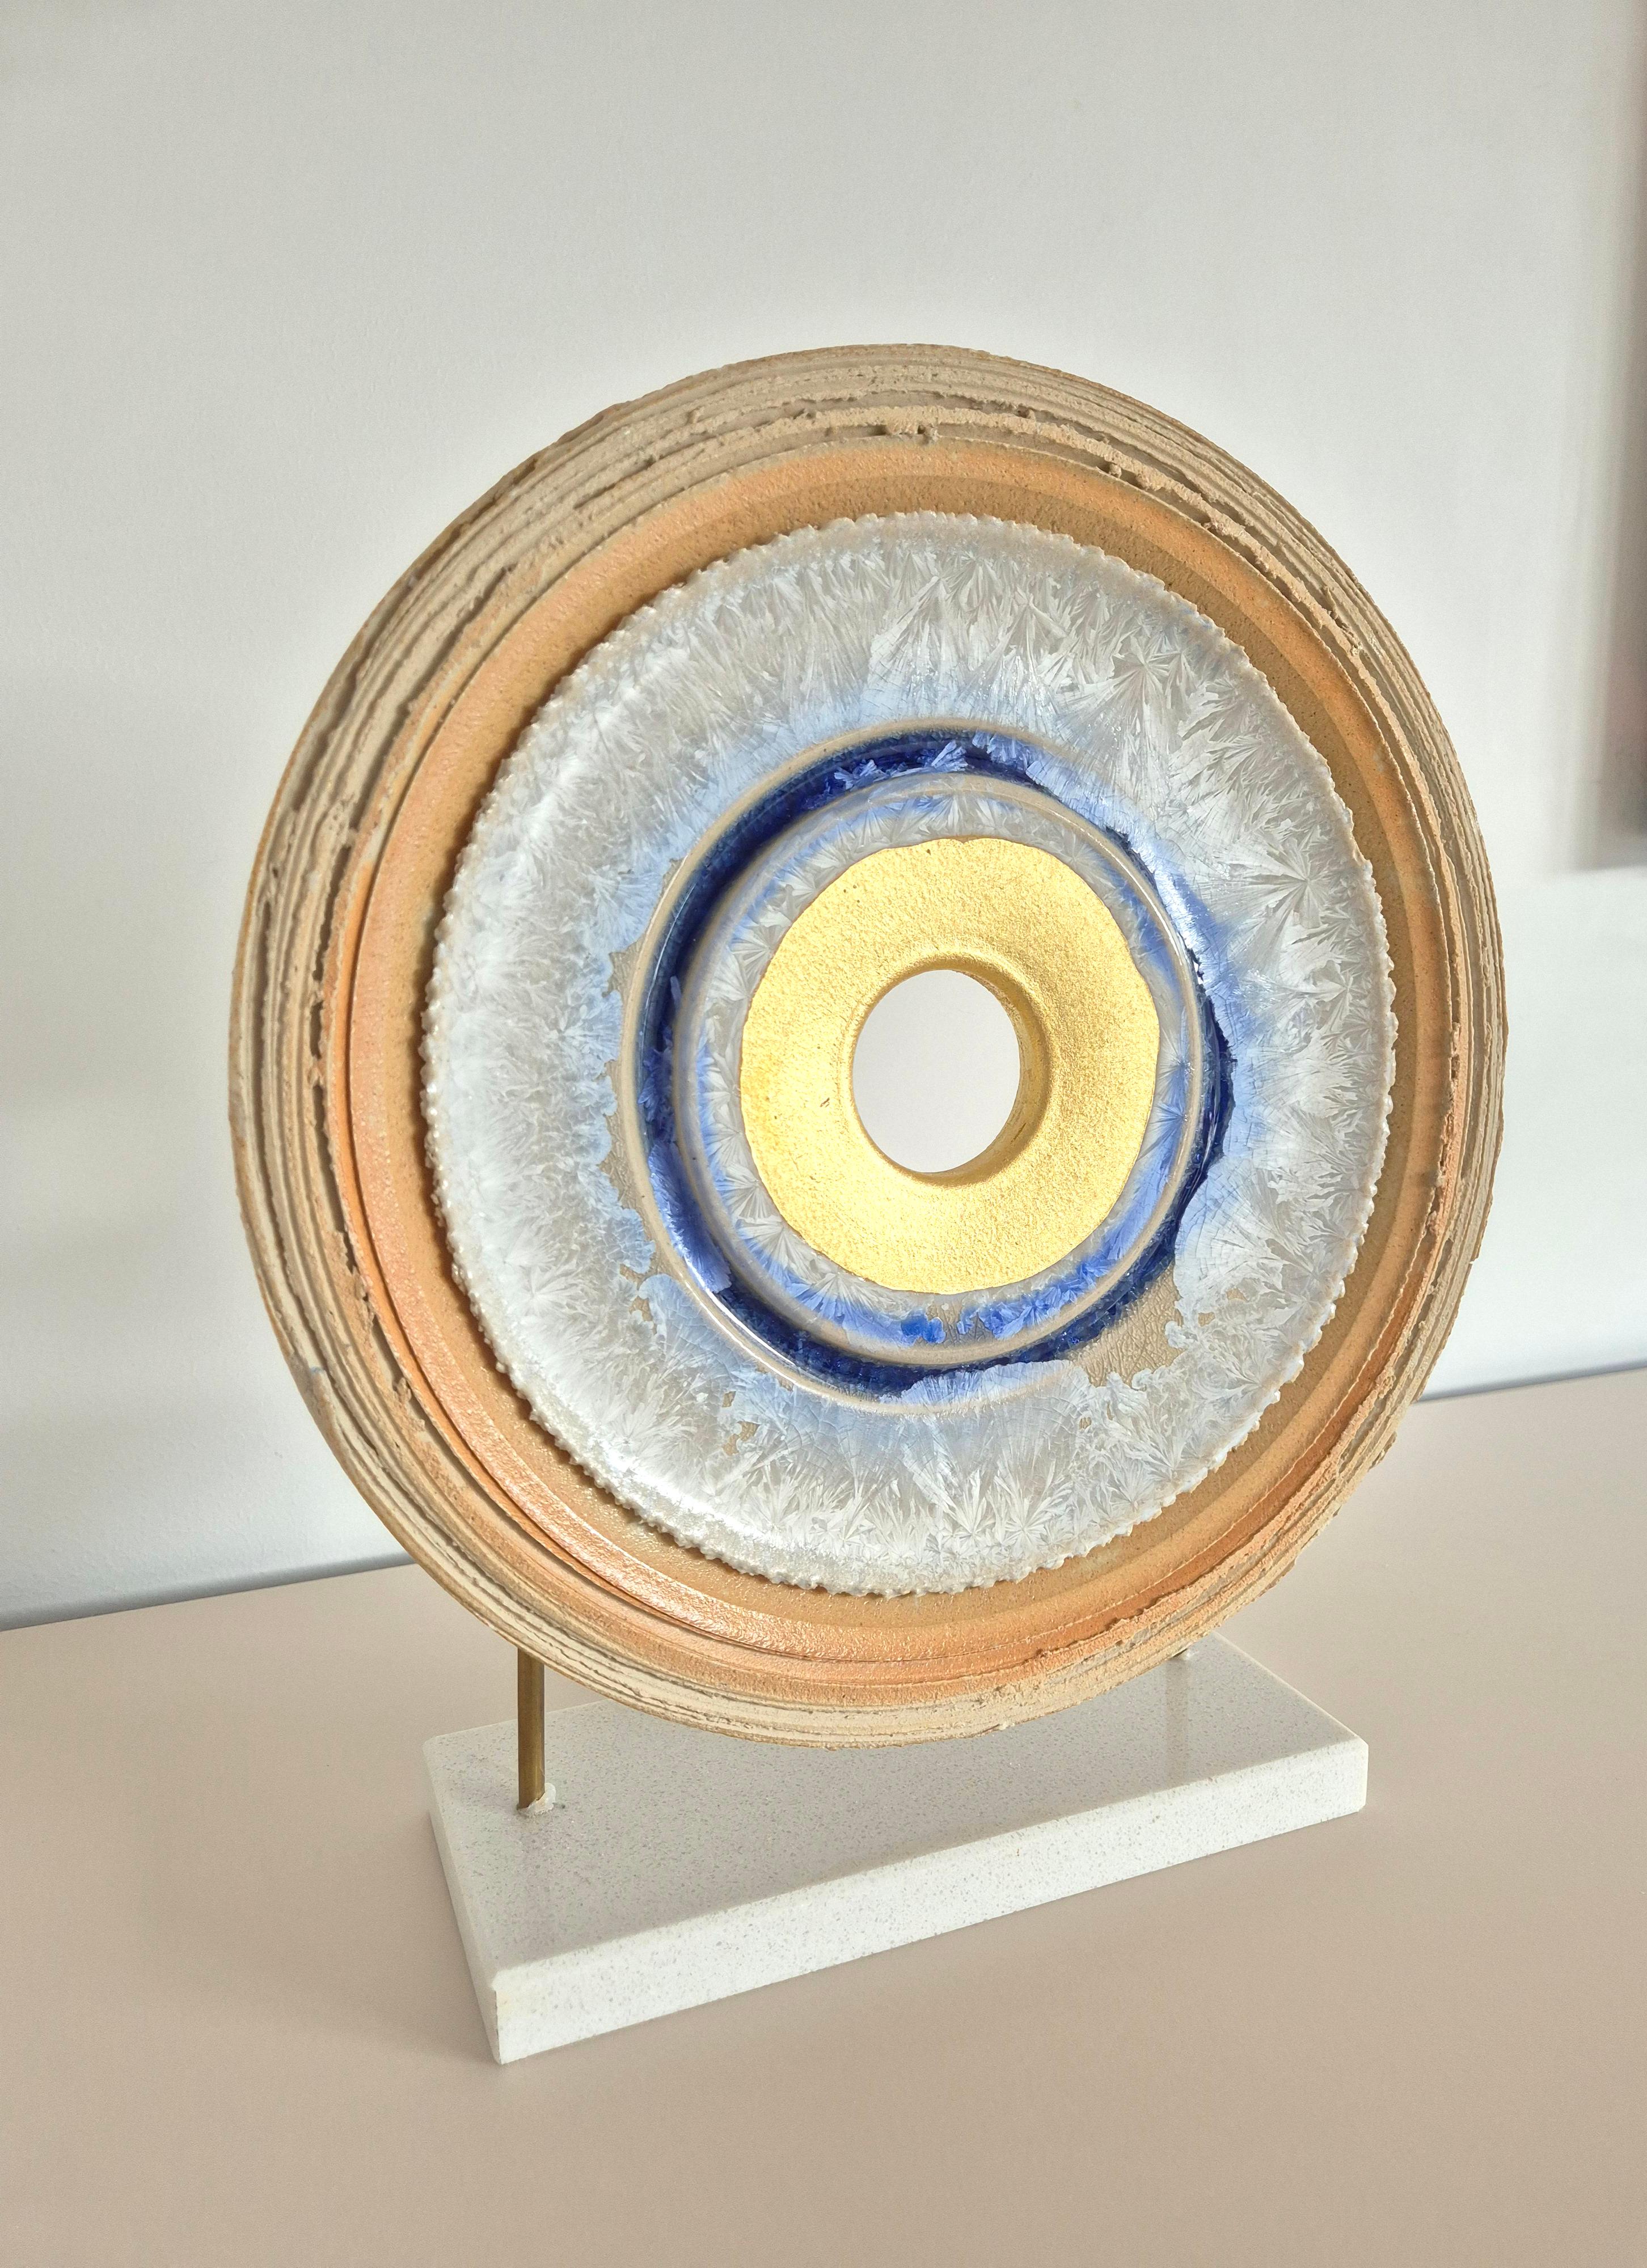 Creatio Continua Ice by Kuno Vollet - gold, blue circular ceramic sculpture For Sale 2